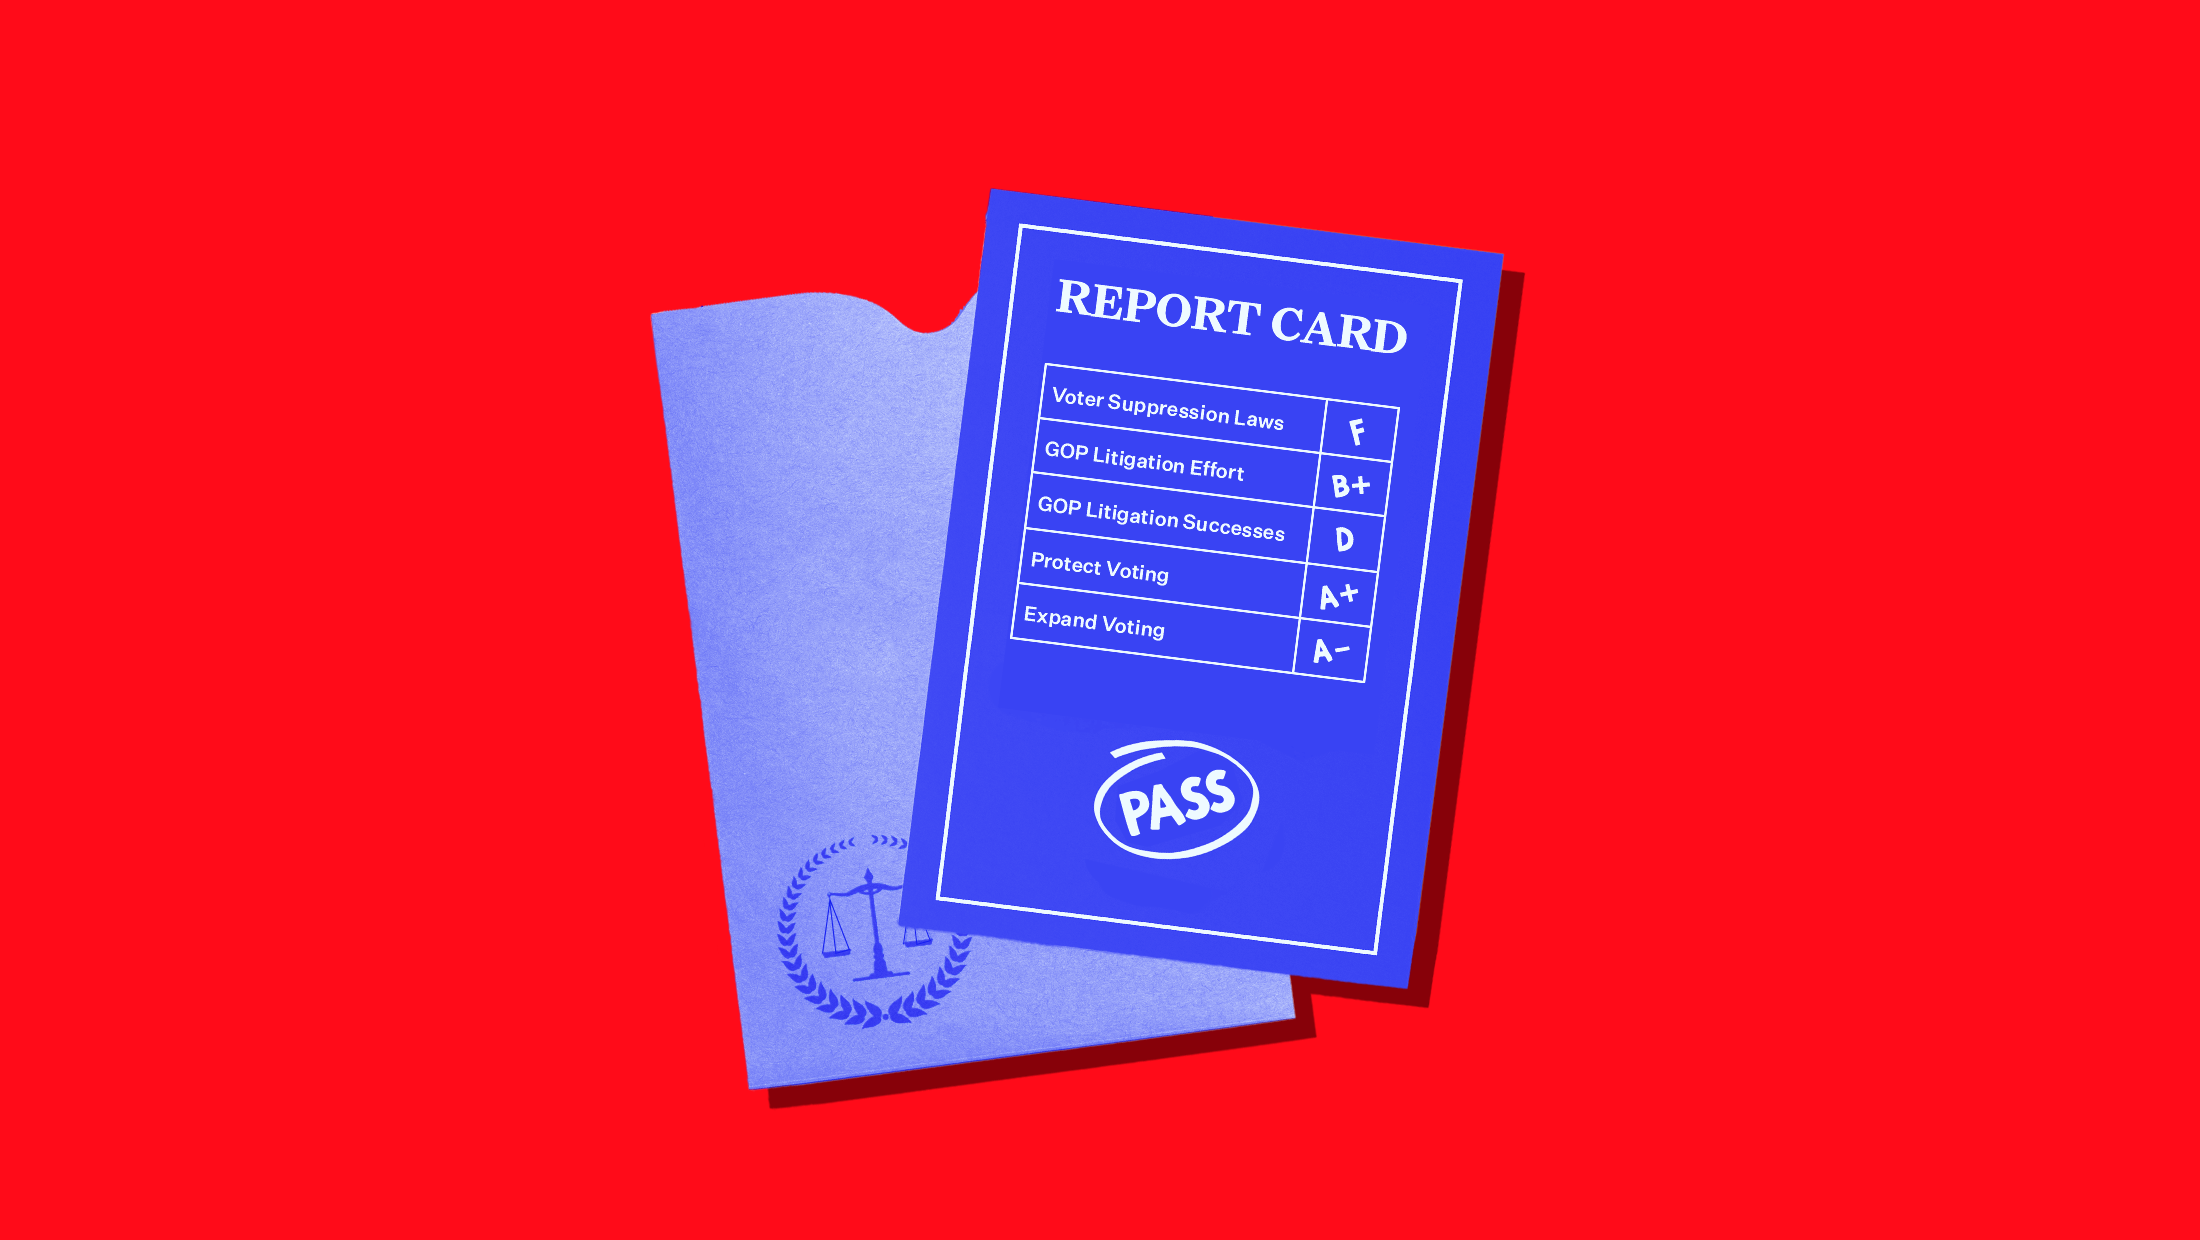 Red background with blue image of report card that reads "REPORT CARD: Voter suppression laws: F, GOP Litigation Effort: B+, GOP Litigation Successes: D, Protect Voting: A+, Expand Voting: A-" and "PASS" in a circle at the bottom and an scale imprinted on the envelope behind the report card.